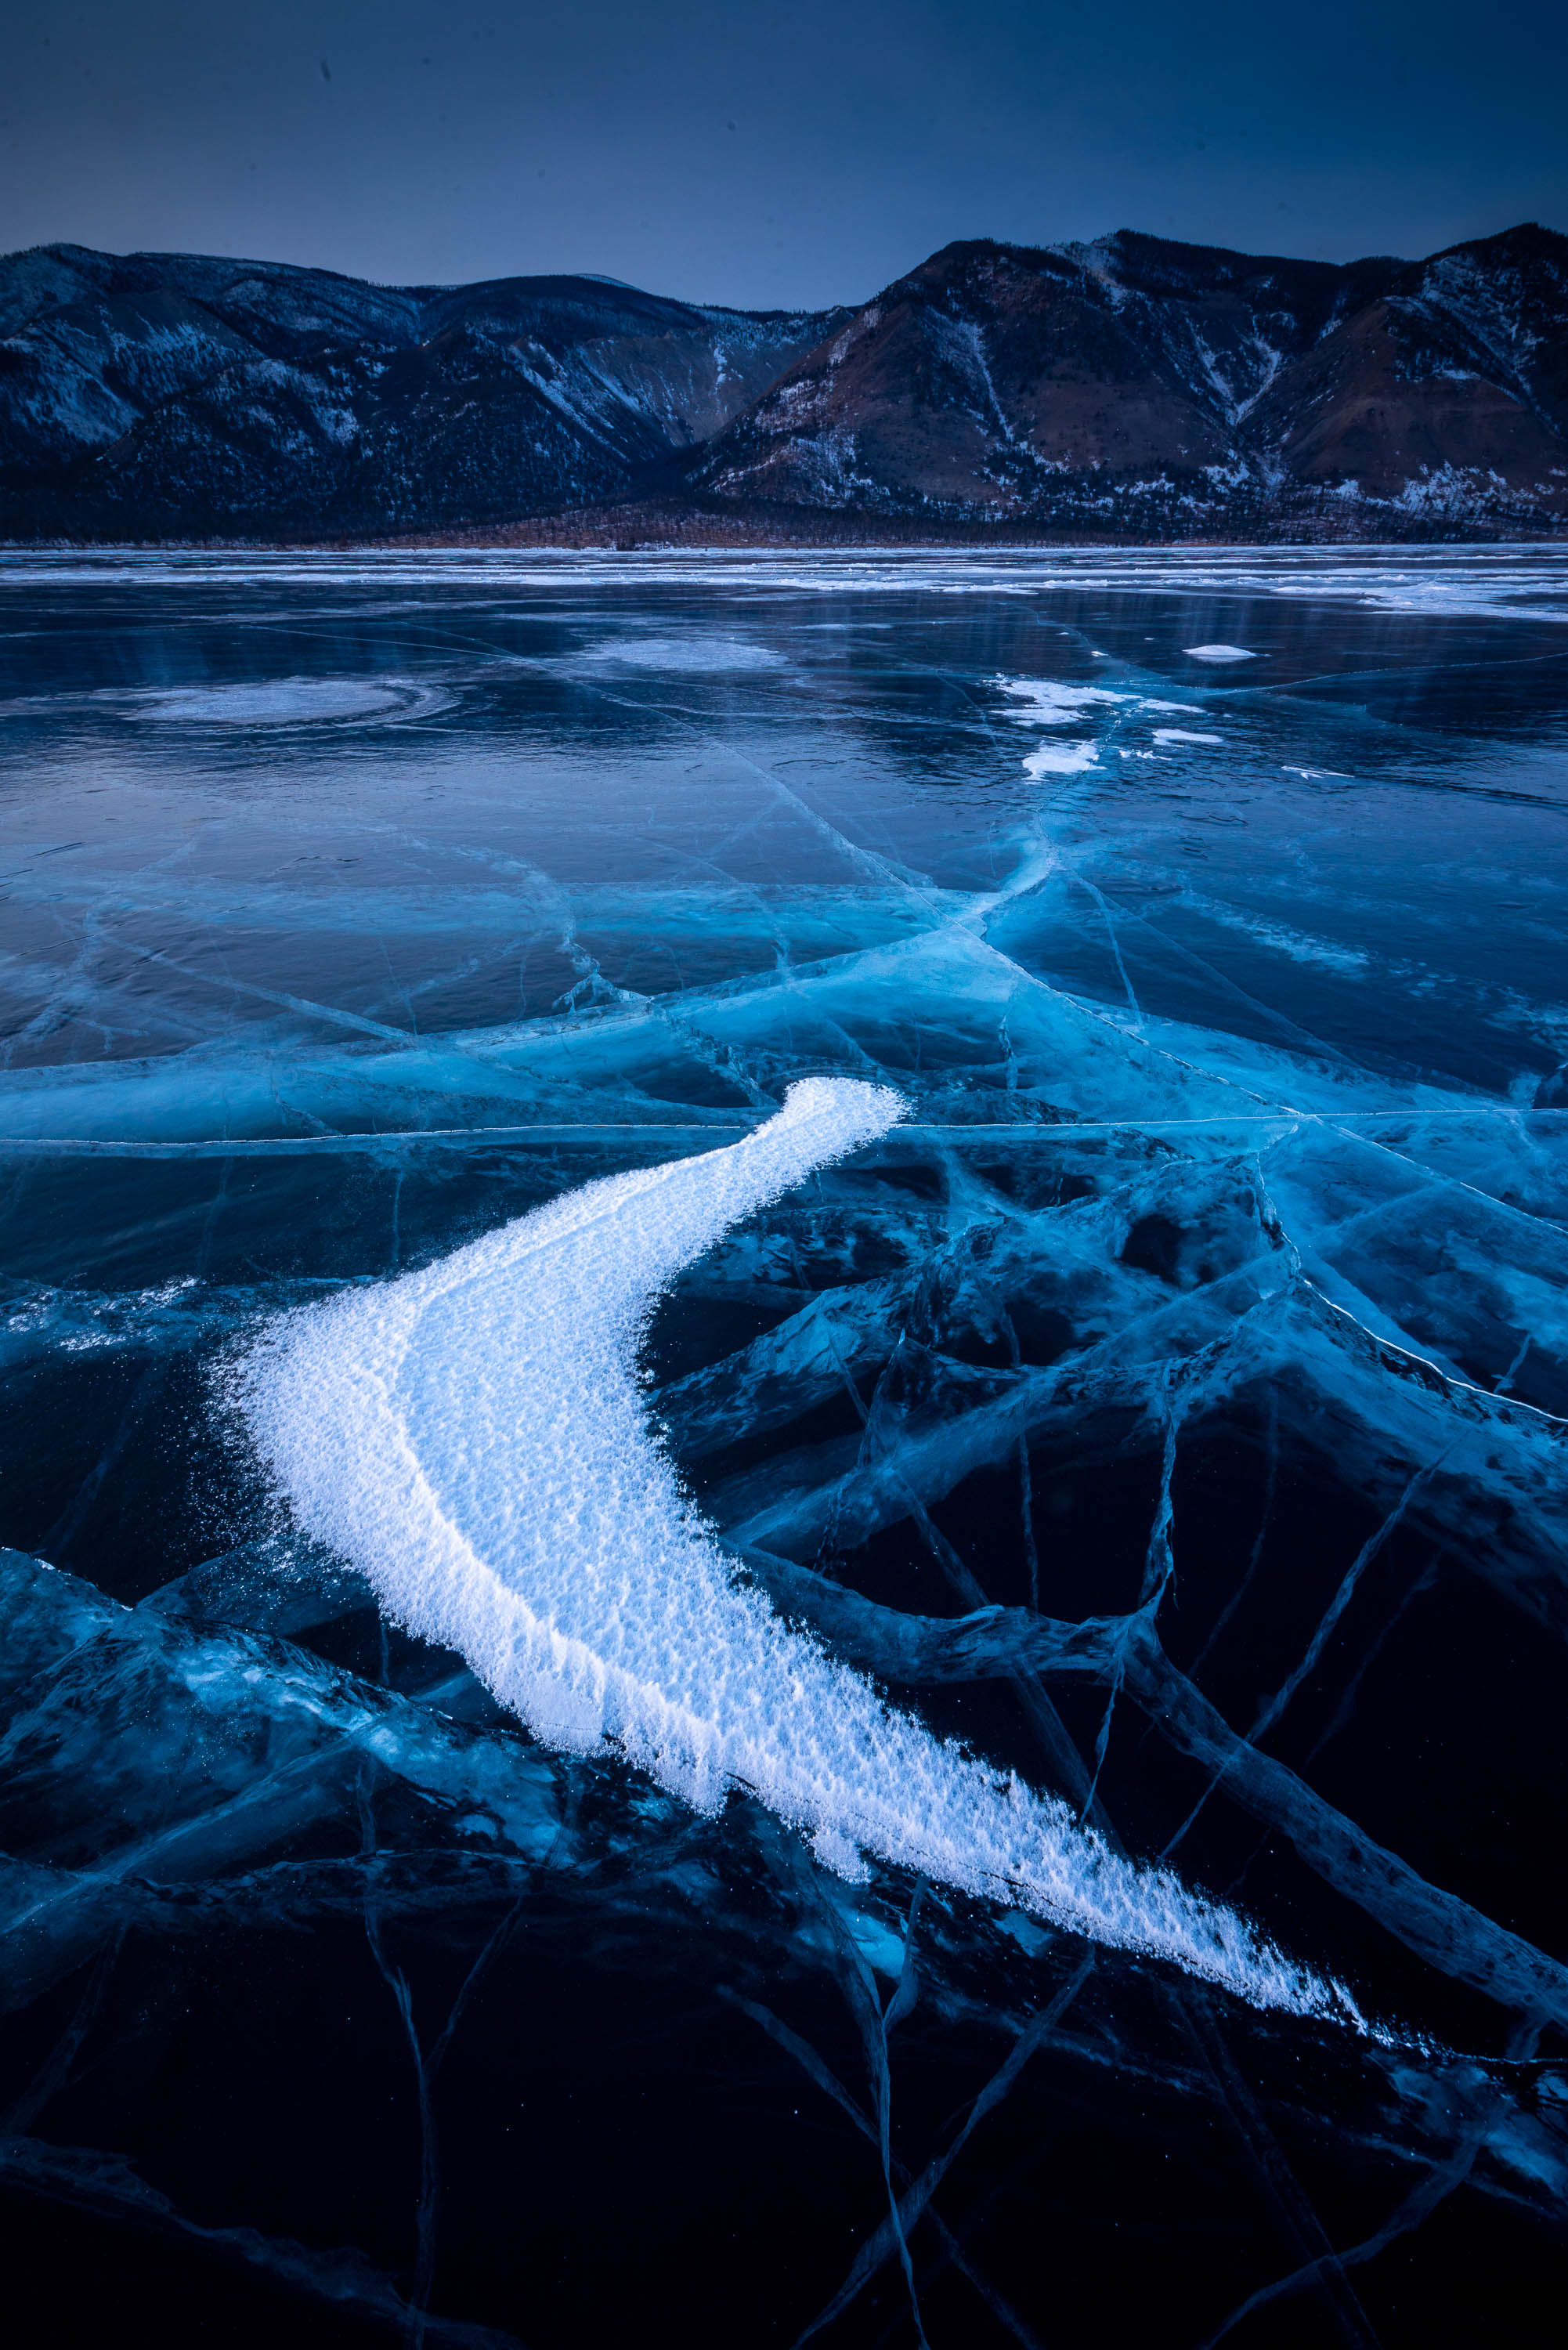 A frozen lake with some fresh snow, and a long mountain wall in the background, Lake Baikal #30, Siberia, Russia